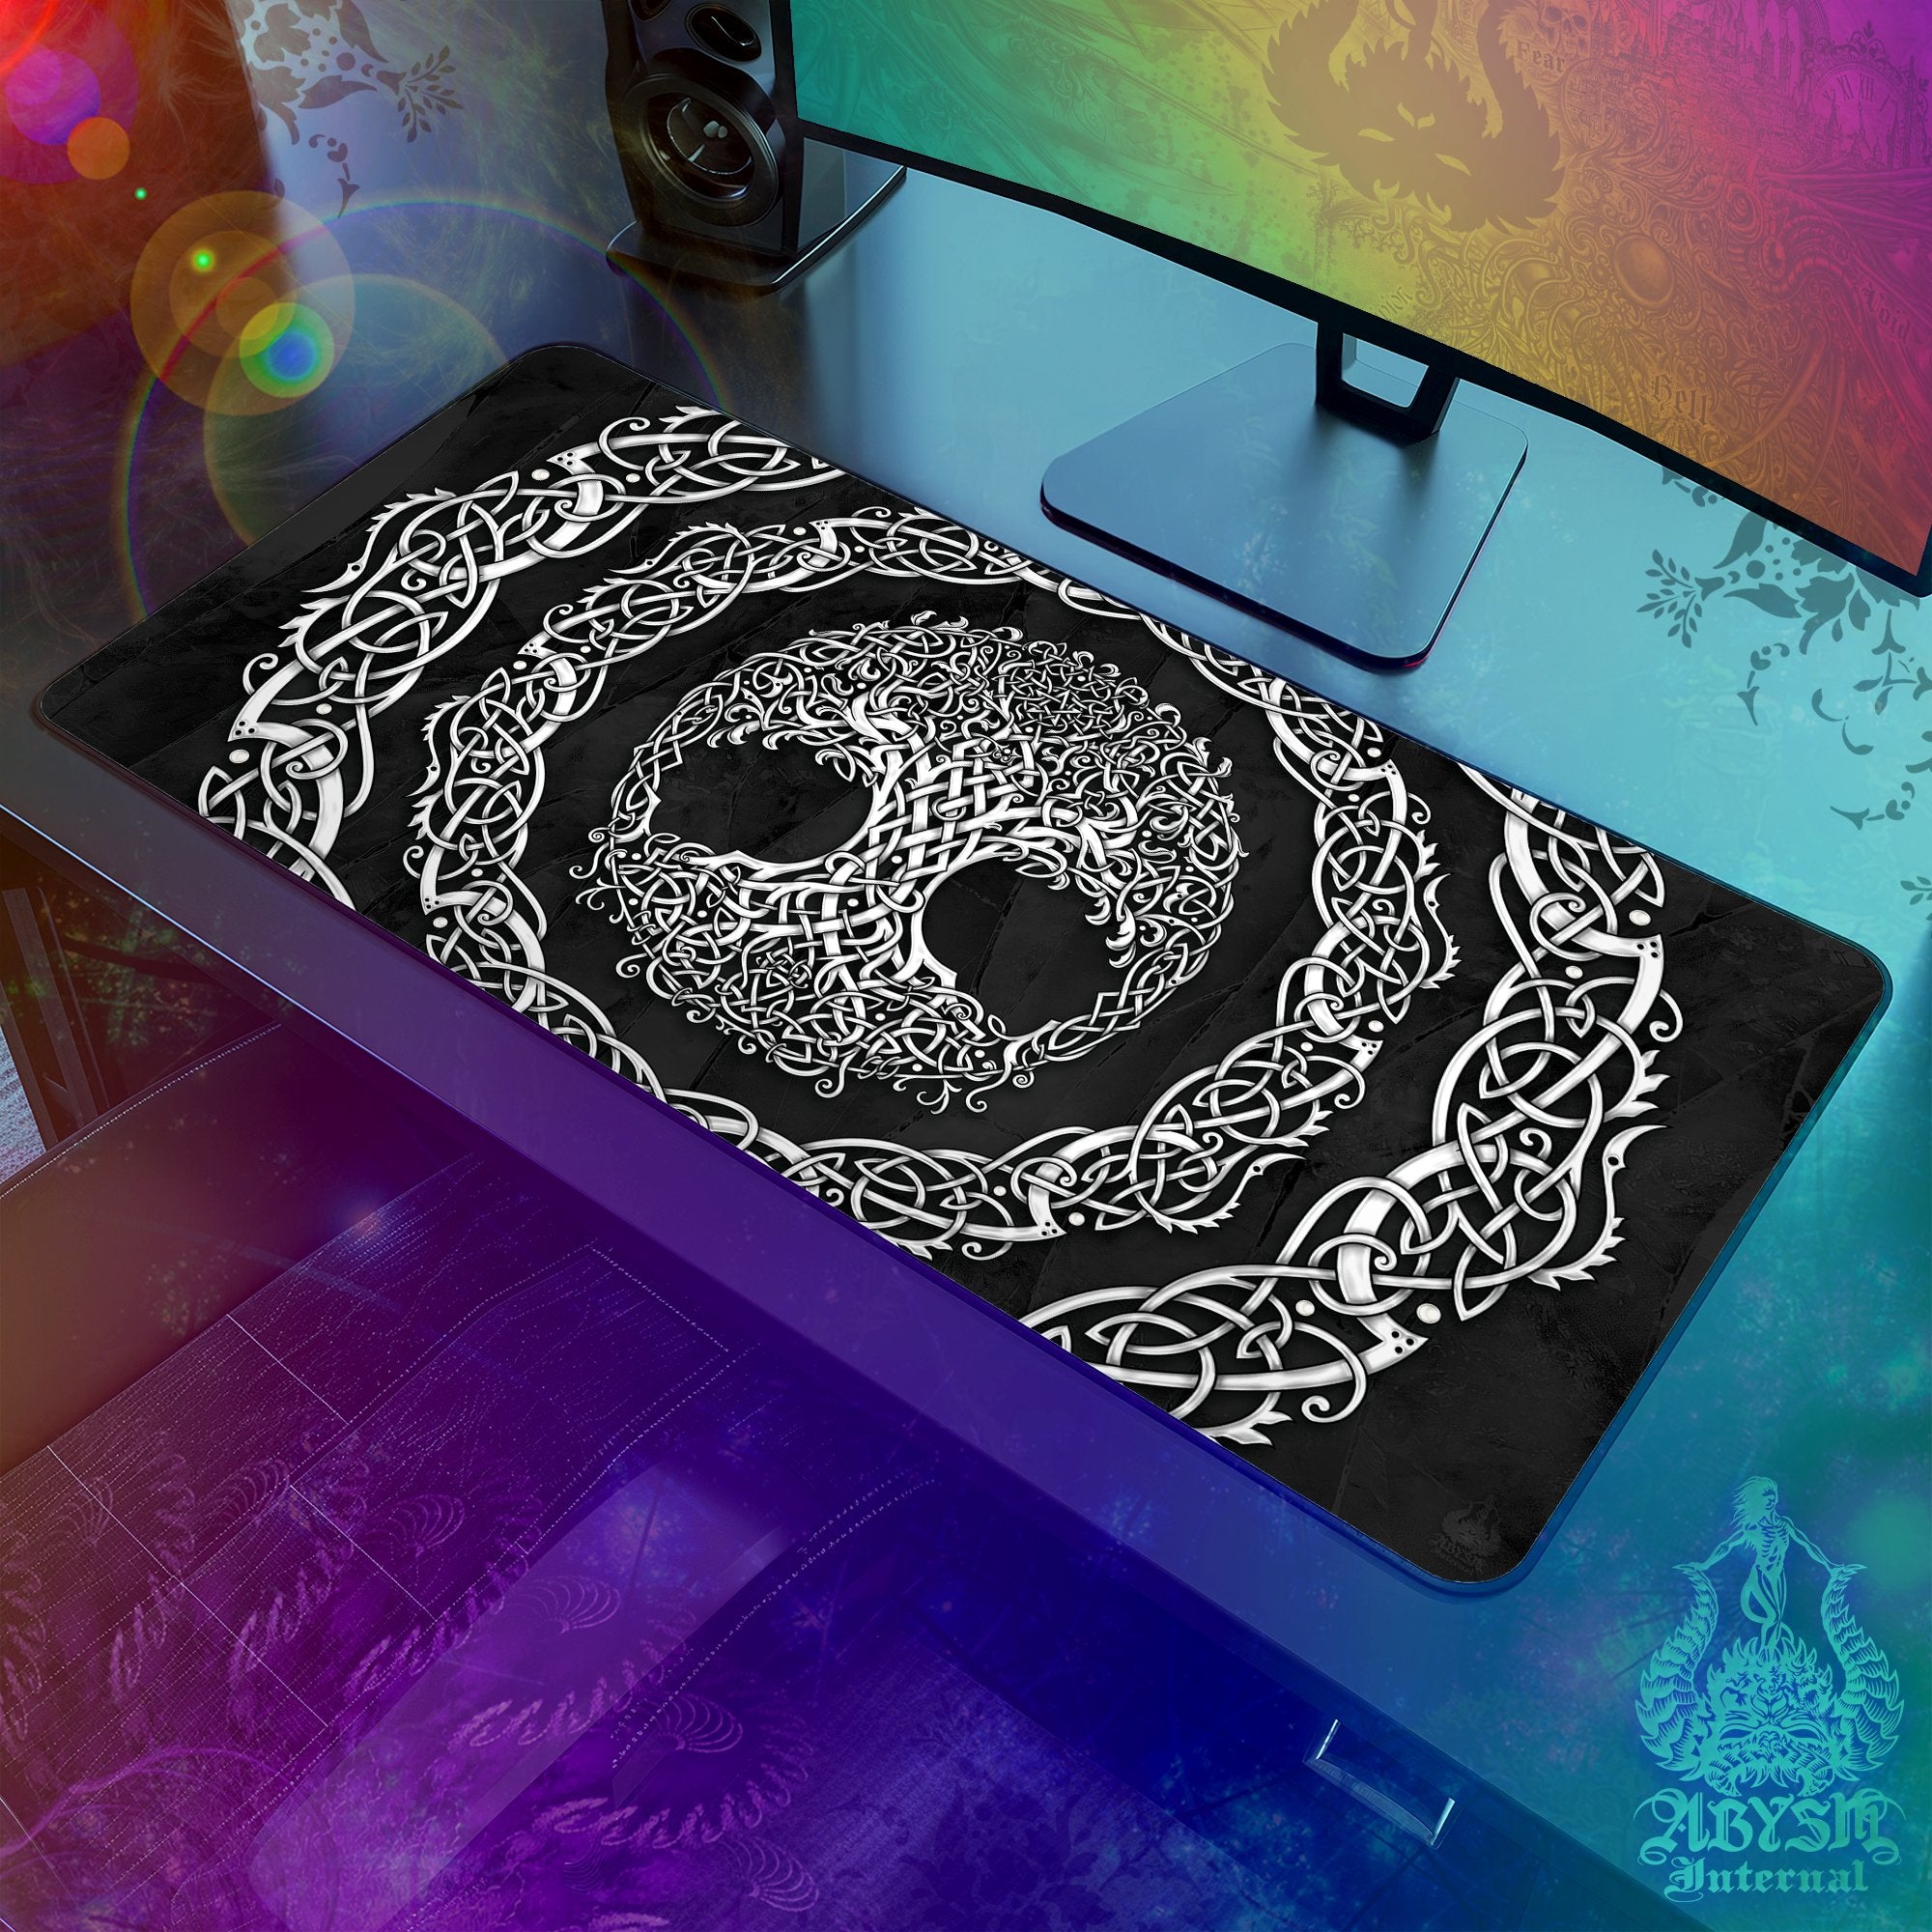 Tree of Life Gaming Mouse Pad, Celtic Knotwork Desk Mat, Wicca Table Protector Cover, Boho Workpad, Art Print - White, 3 Colors - Abysm Internal